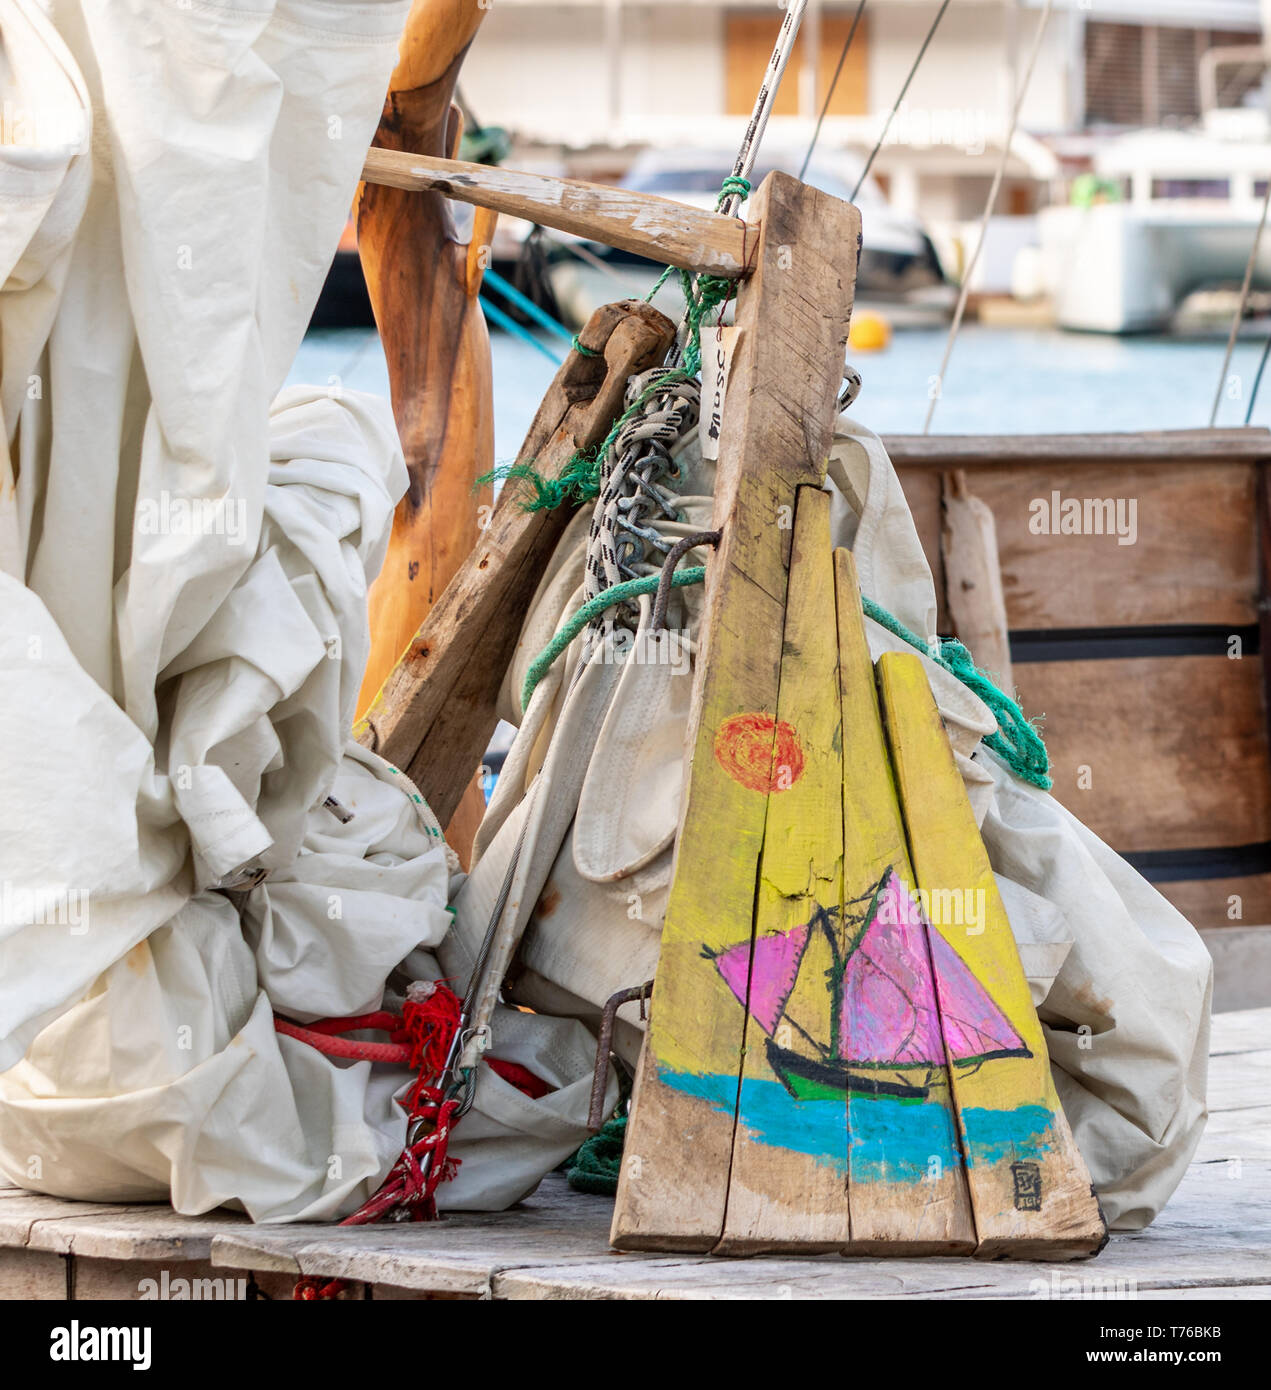 a colorful depiction of a sail boat painted on scrap wood in Gustavia, St Barts Stock Photo